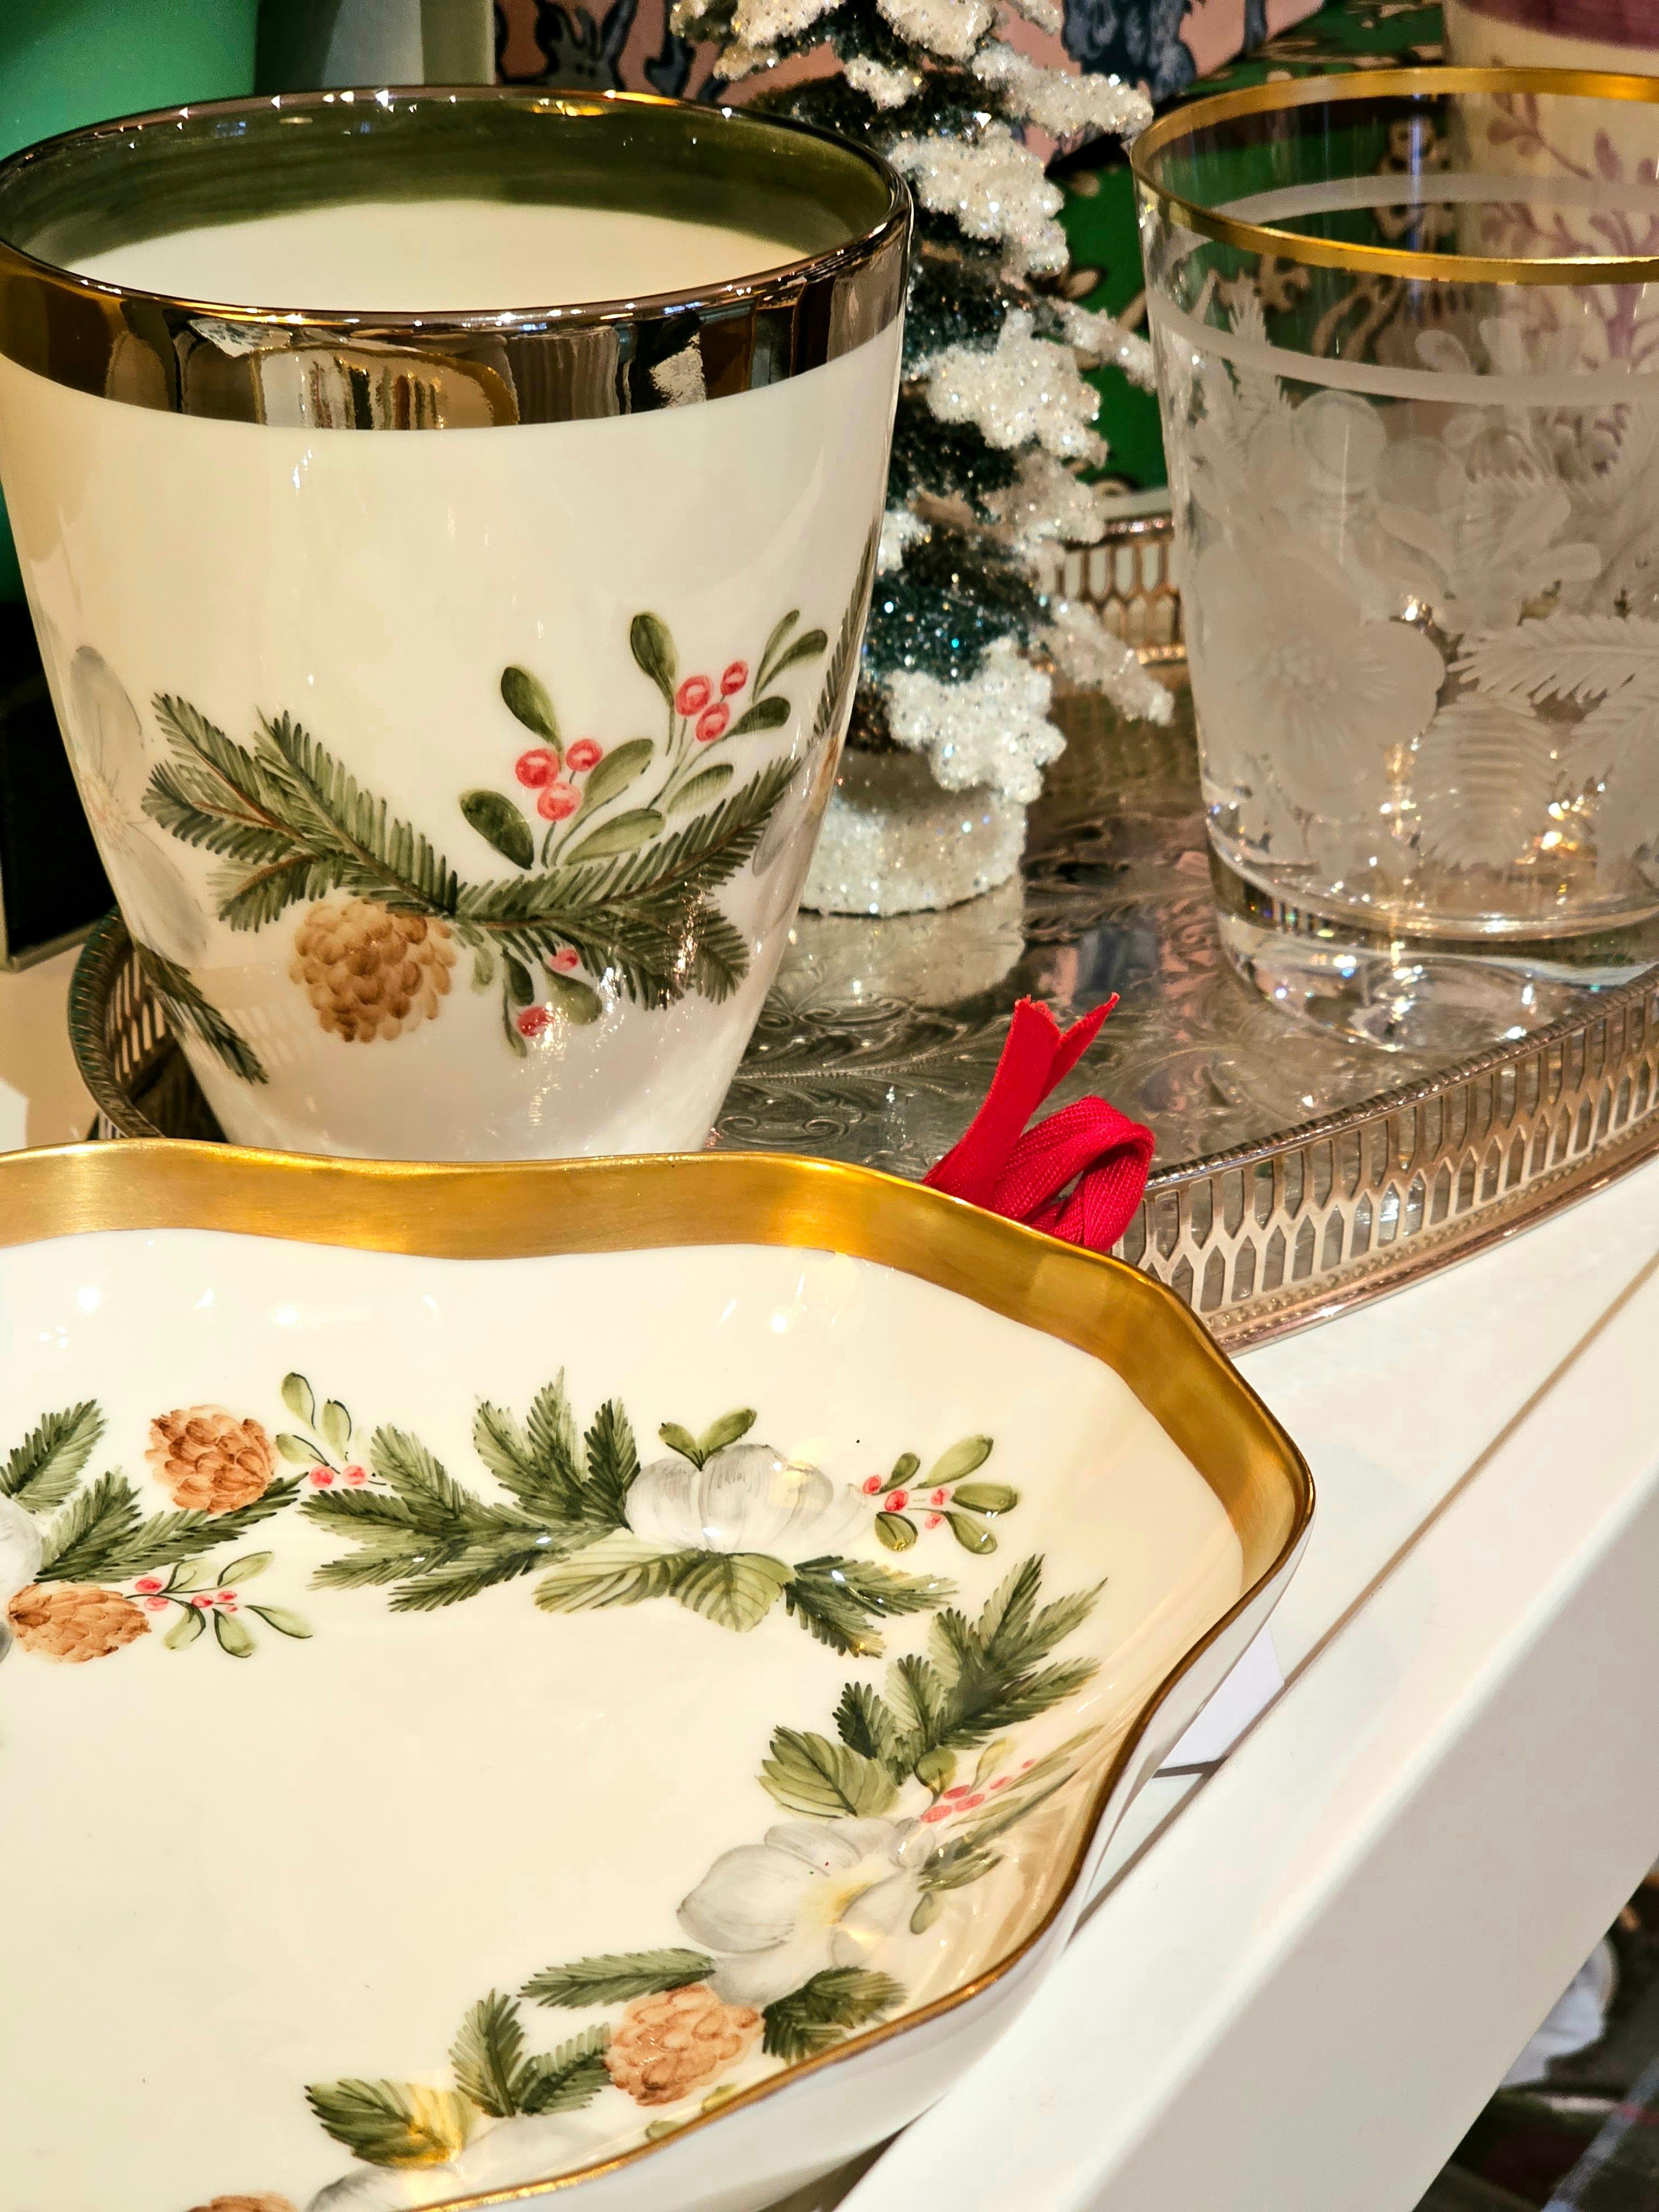 Completely handmade porcelain pastry dish hands-free painted with a charming christmas garlande with a christmas roses and fir. Rimmed by hand with a fine 24 carat gold line. Handmade in Bavaria / Germany.
About Sofina porcelain:
Based on the